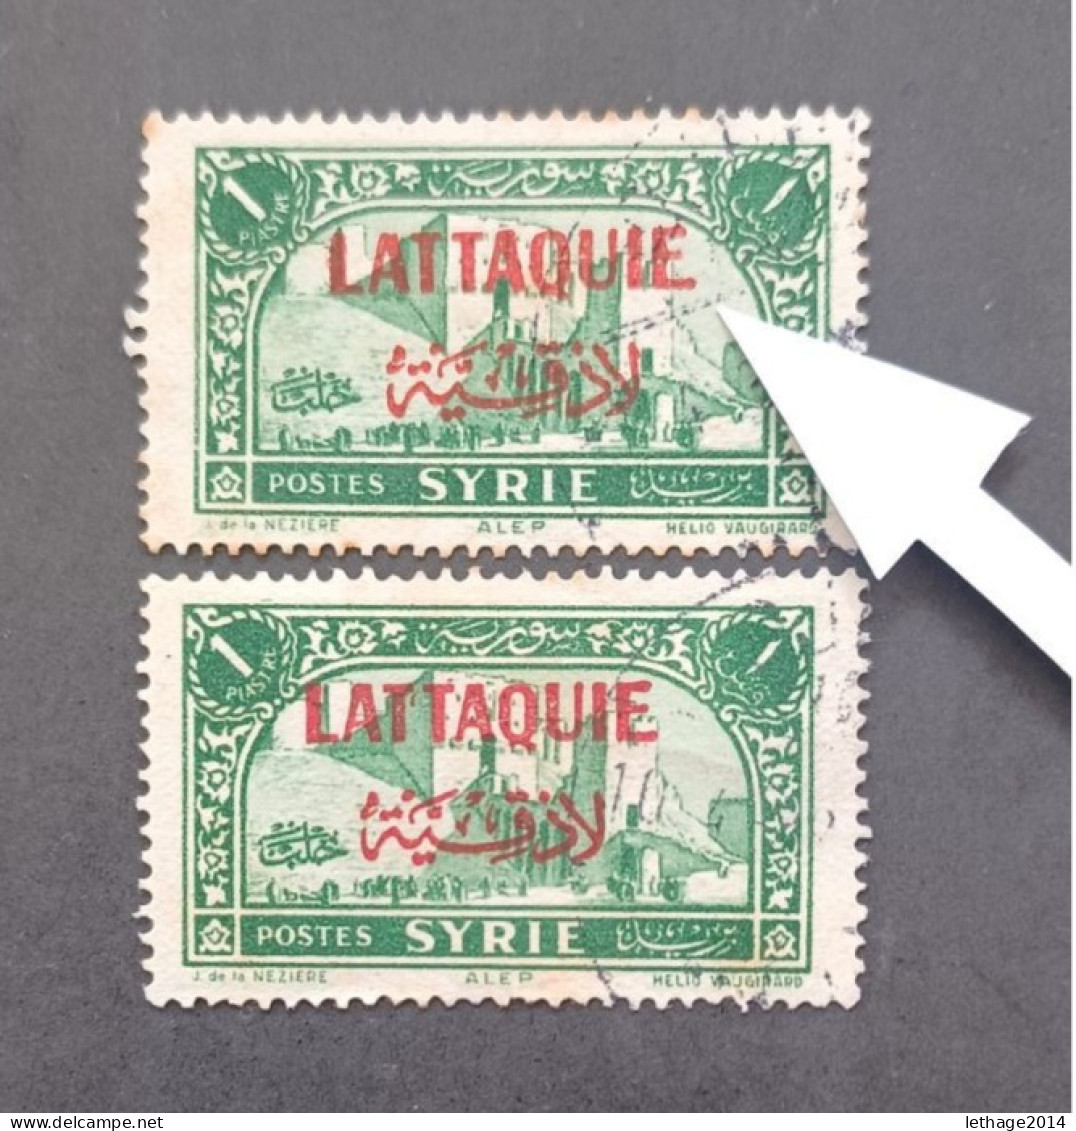 FRENCH OCCUPATION IN SYRIA LATTAQUIE 1940 STAMPS OF SYRIE DE 1930 IN OVERPRINT CAT YVERT N 6 ERROR E LONG - Usados